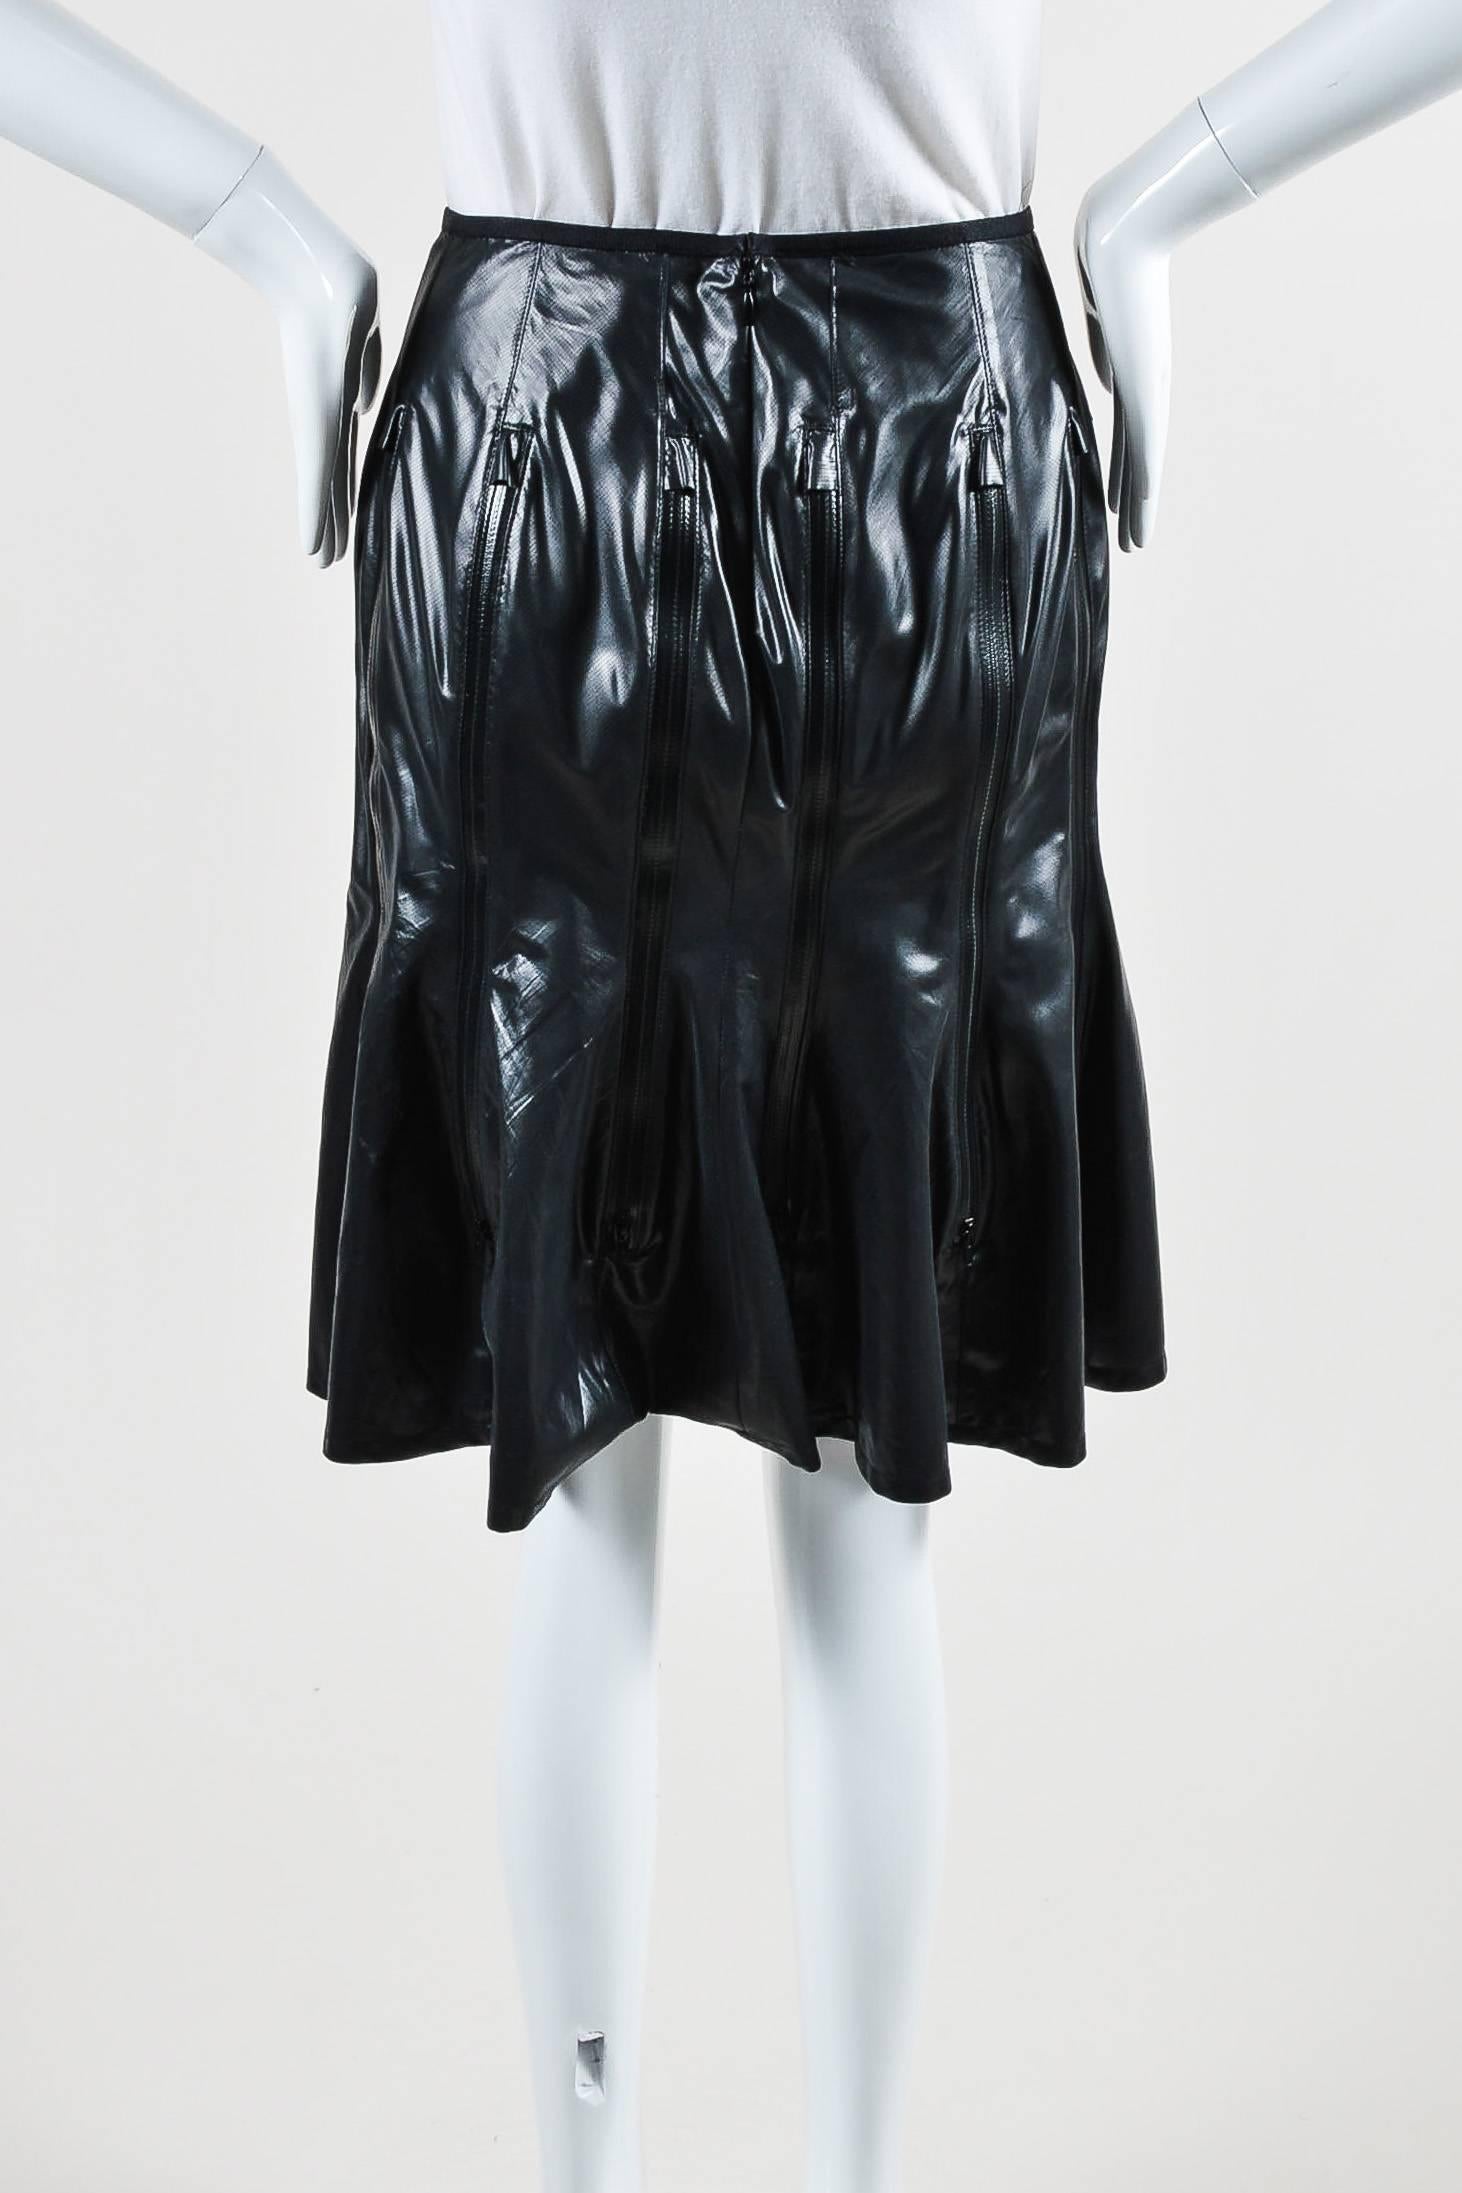 Junya Watanabe Comme des Garcons Black Vertical Zipper Flare Skirt Size XS In Excellent Condition For Sale In Chicago, IL